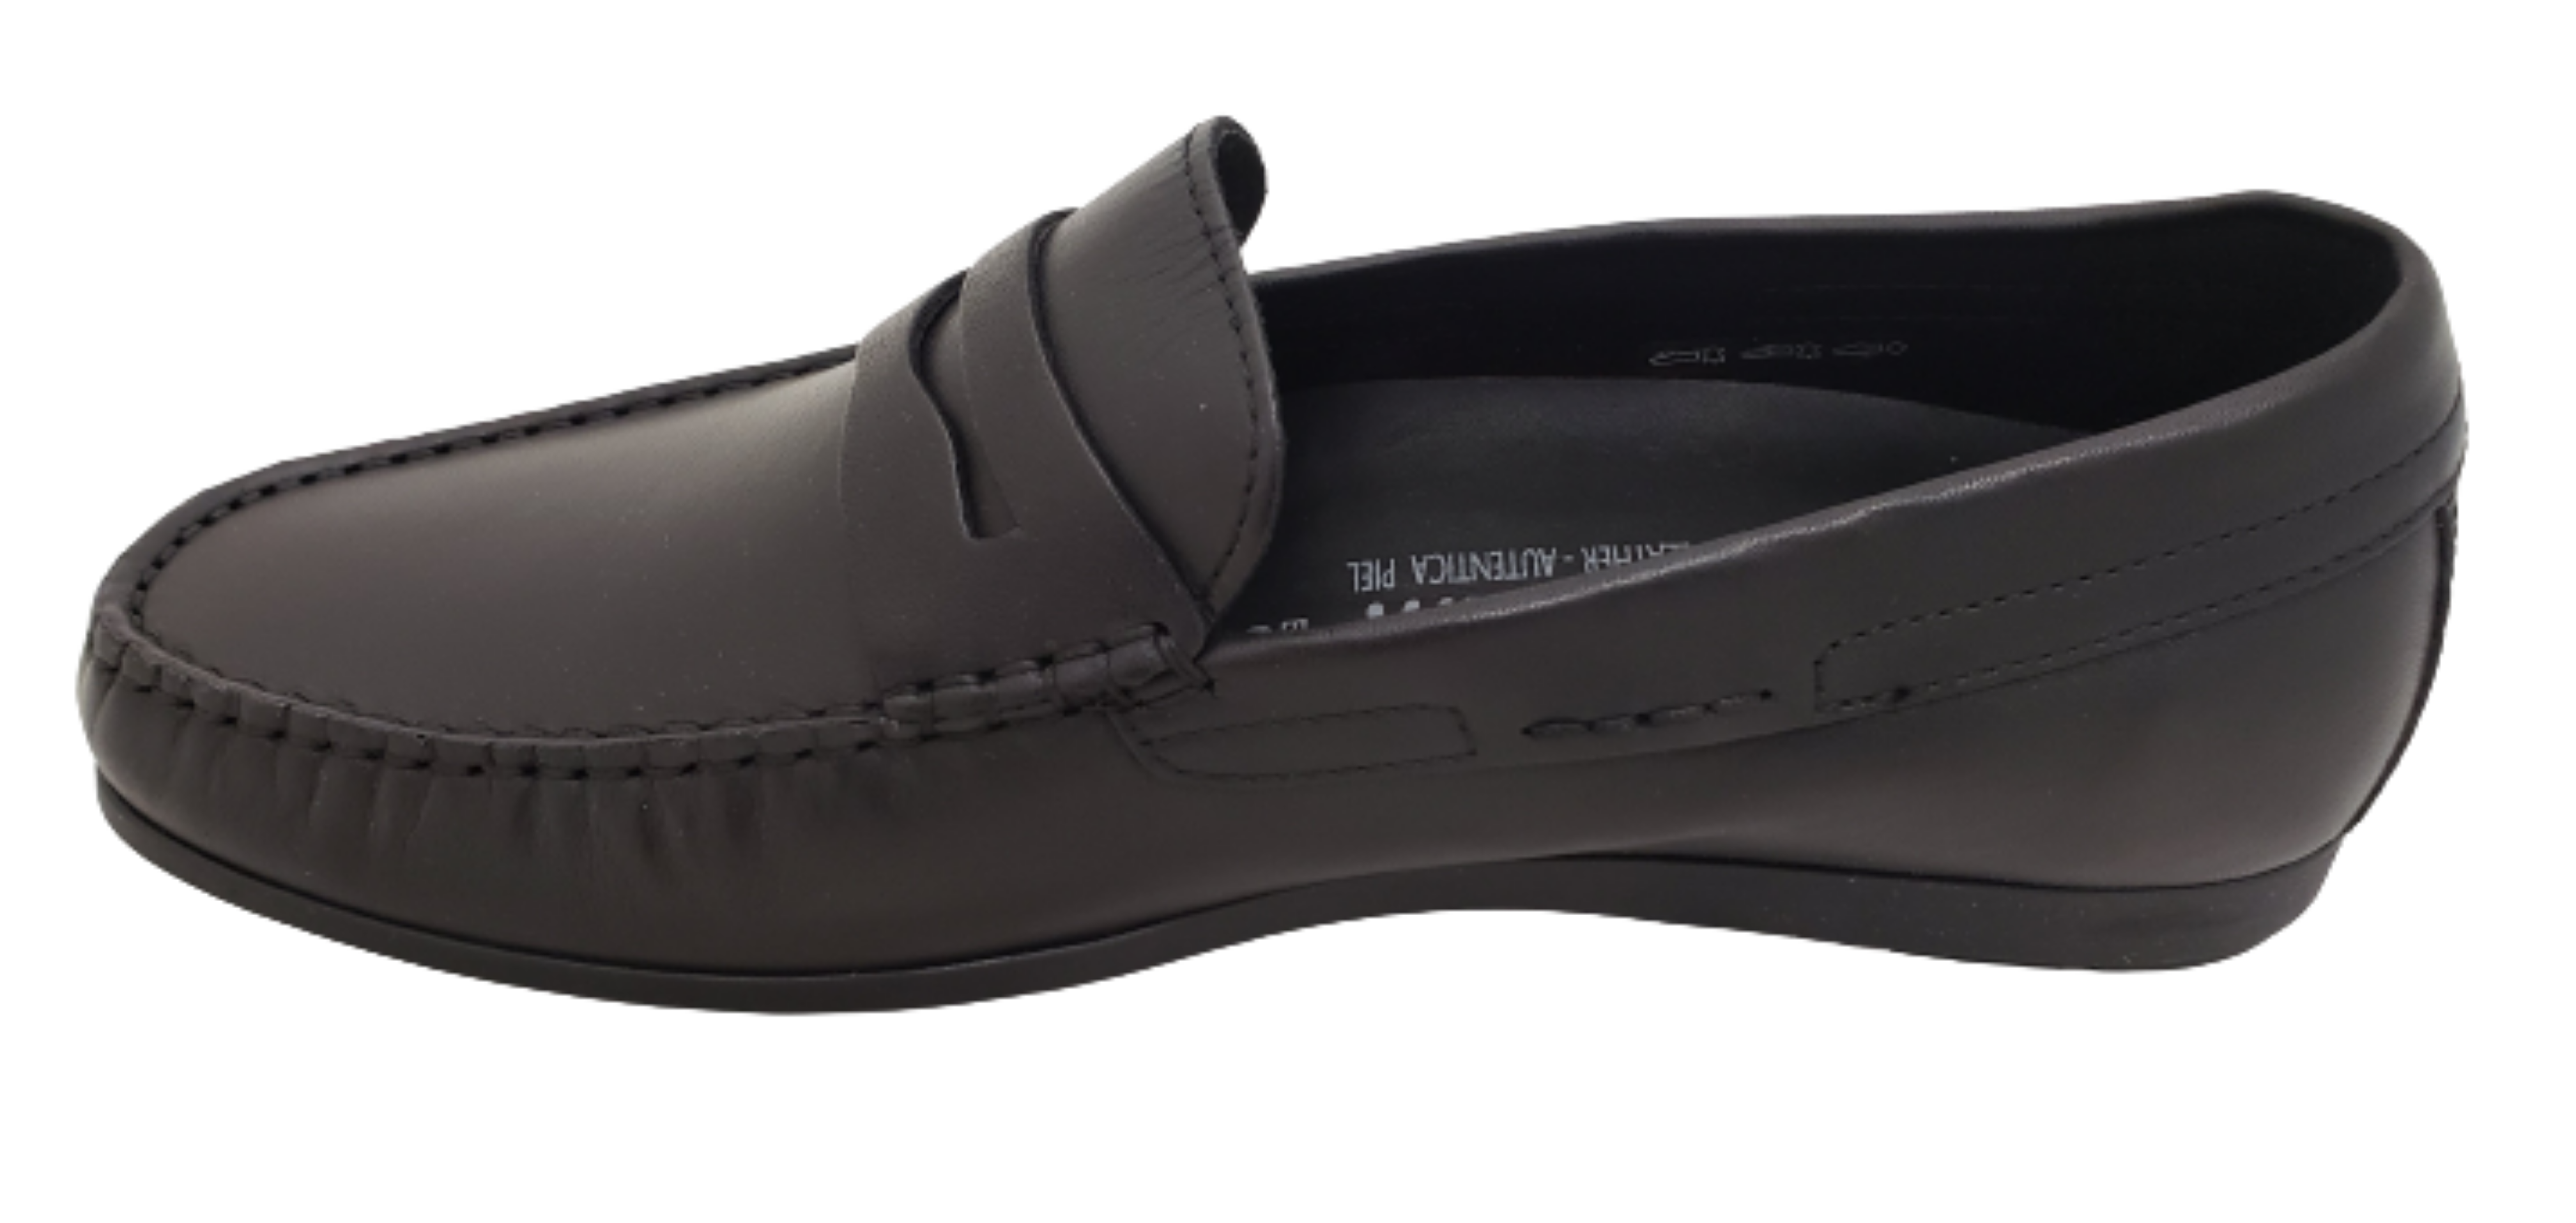 MEPHISTO MEN'S BLACK LOAFERS ALYON A616